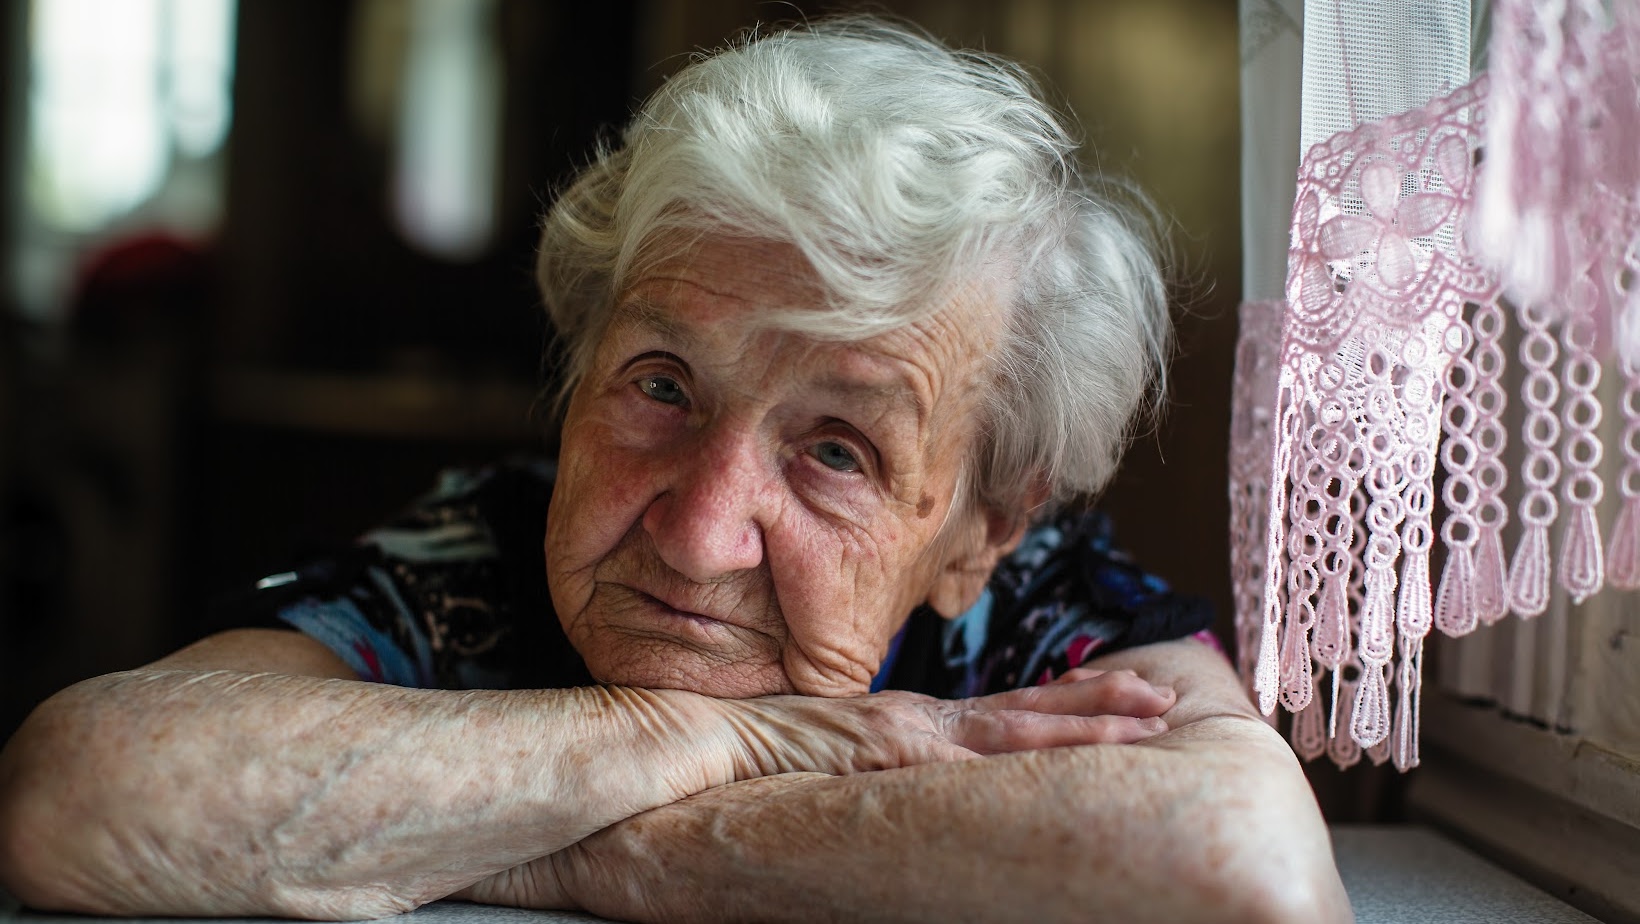 “I’m Not Going”: Handling Alzheimer’s Stubbornness with Compassion